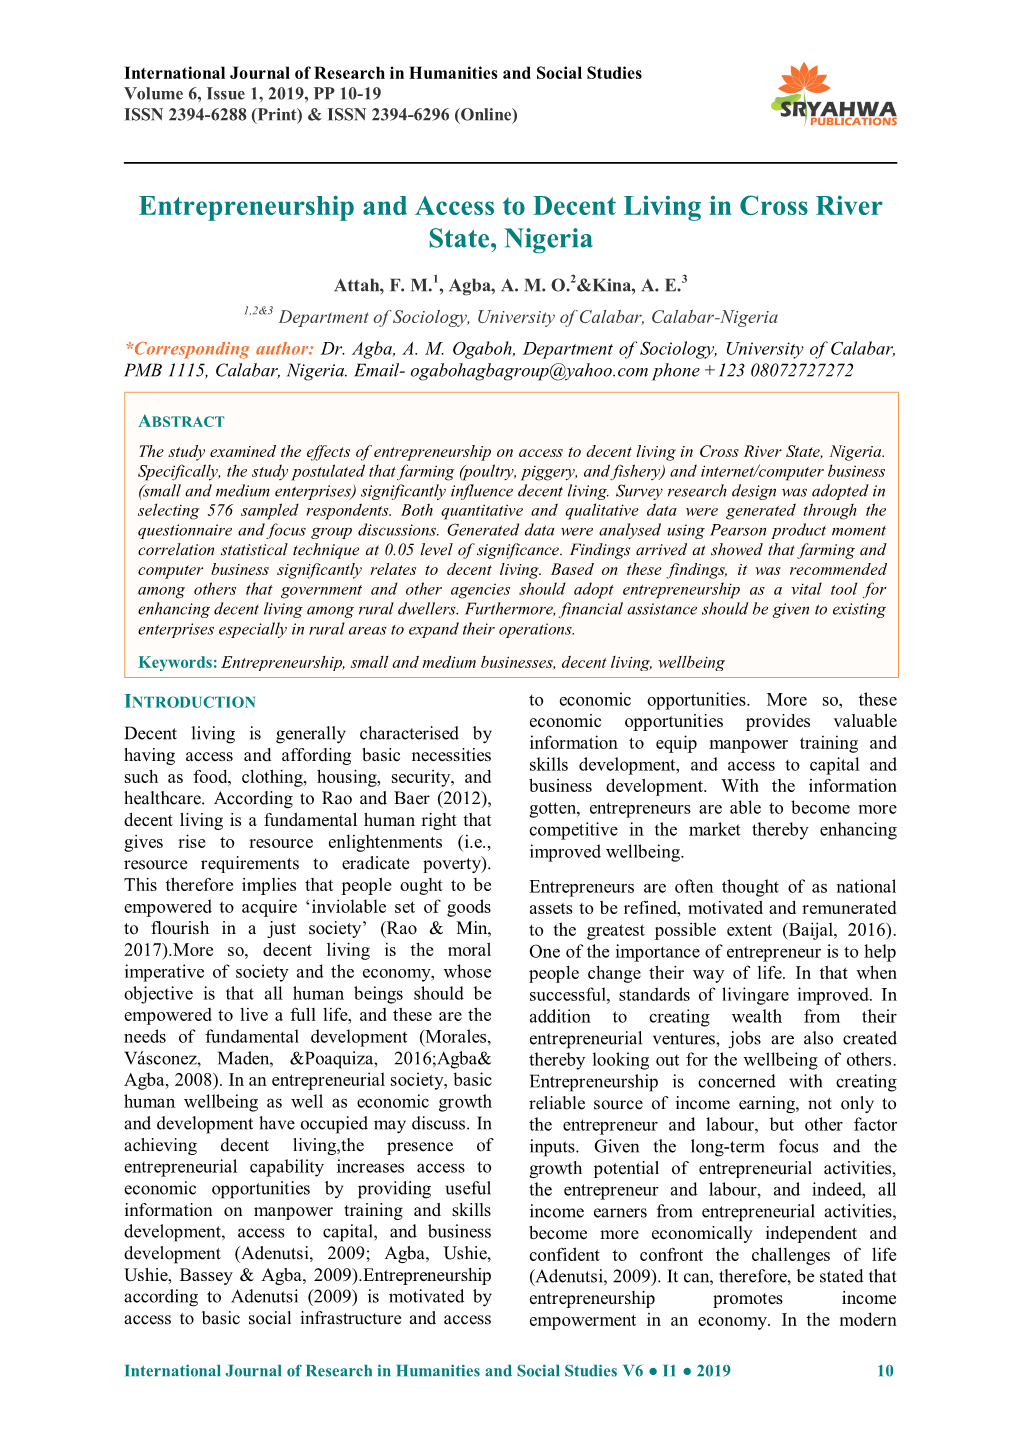 Entrepreneurship and Access to Decent Living in Cross River State, Nigeria